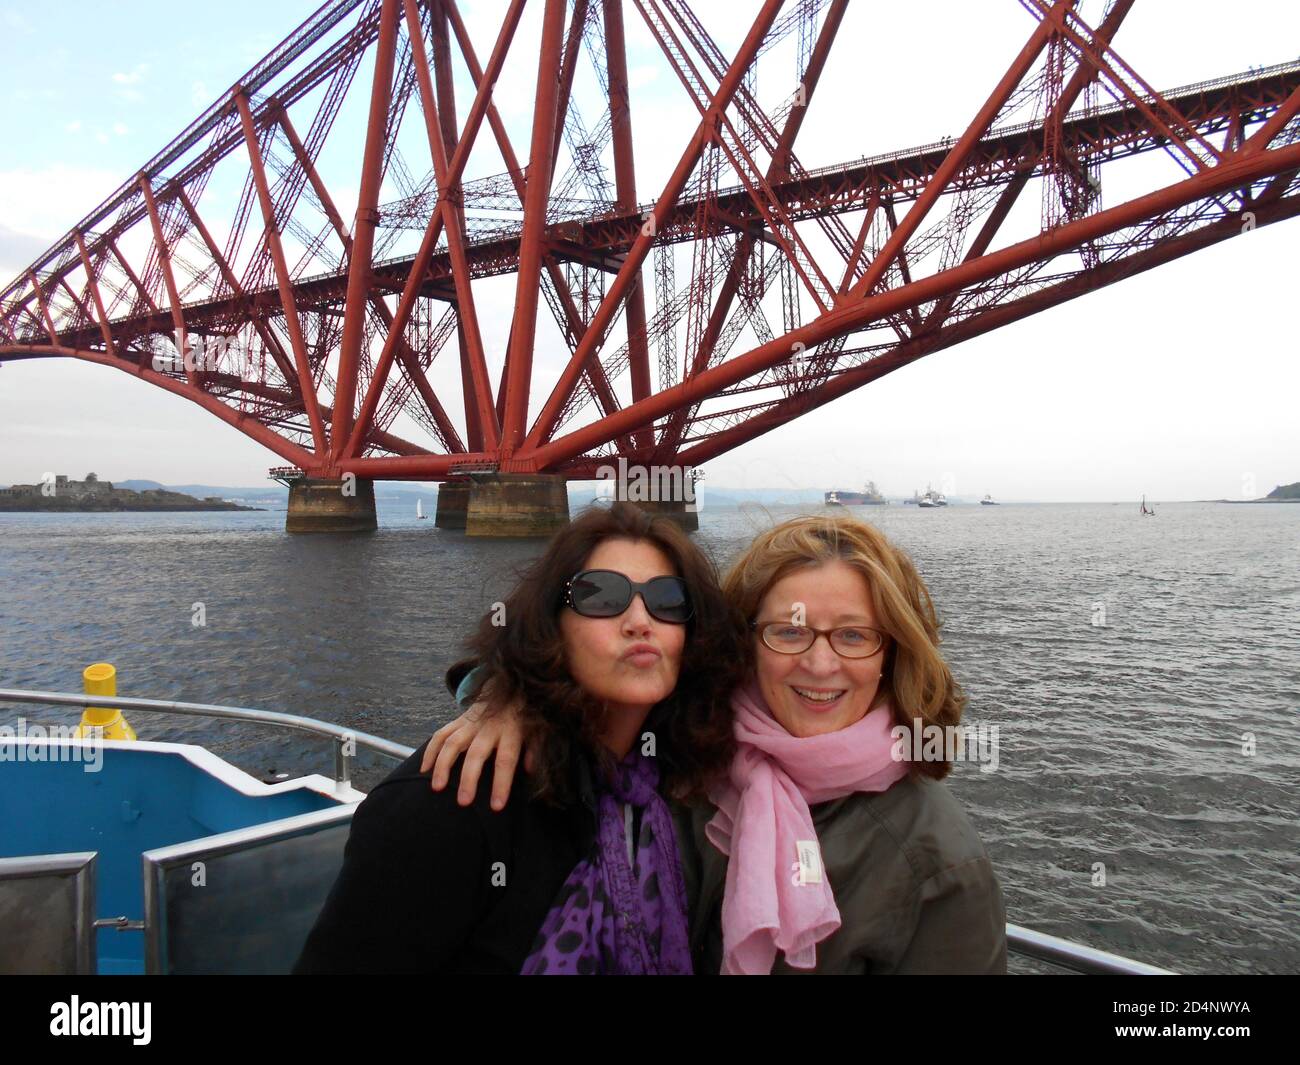 Two pals are enjoying a boat trip on the Firth of Forth which goes under the huge, magnificent and stunning Forth Bridge. It is a world heritage site and has to be seen in all it's splendour. ALAN WYLIE/ALAMY ©. Stock Photo